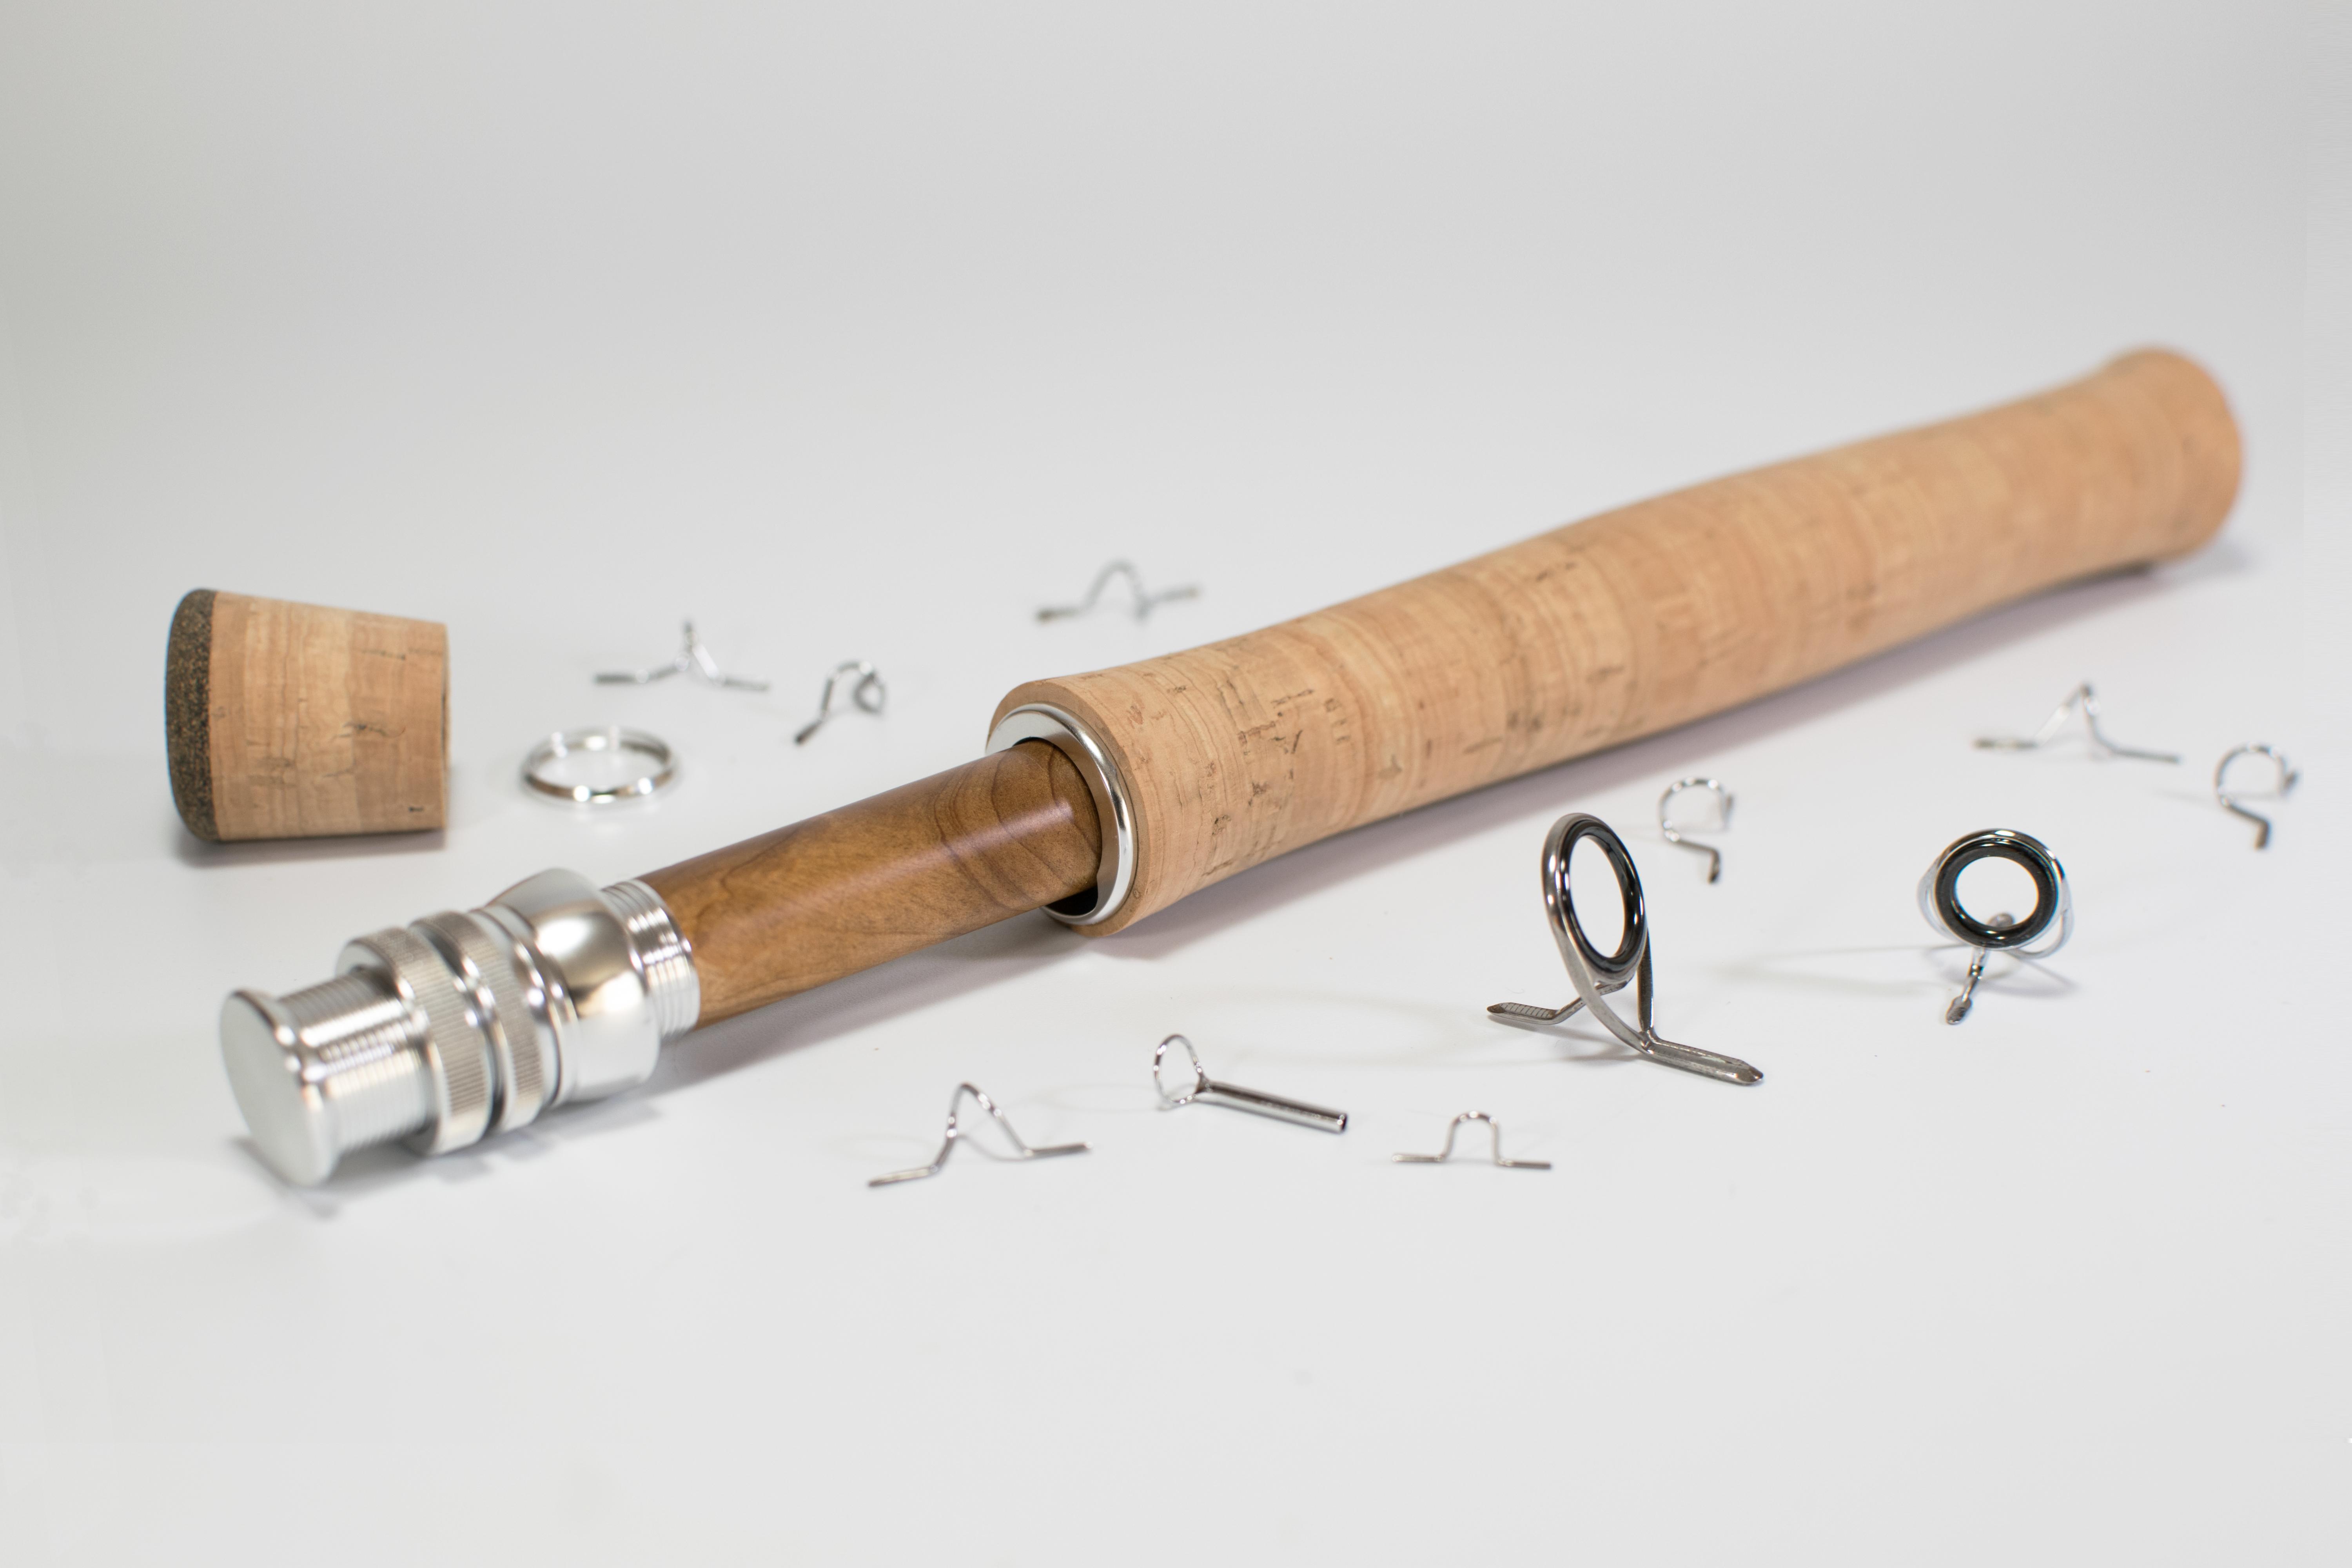 Fly rod components full kit 